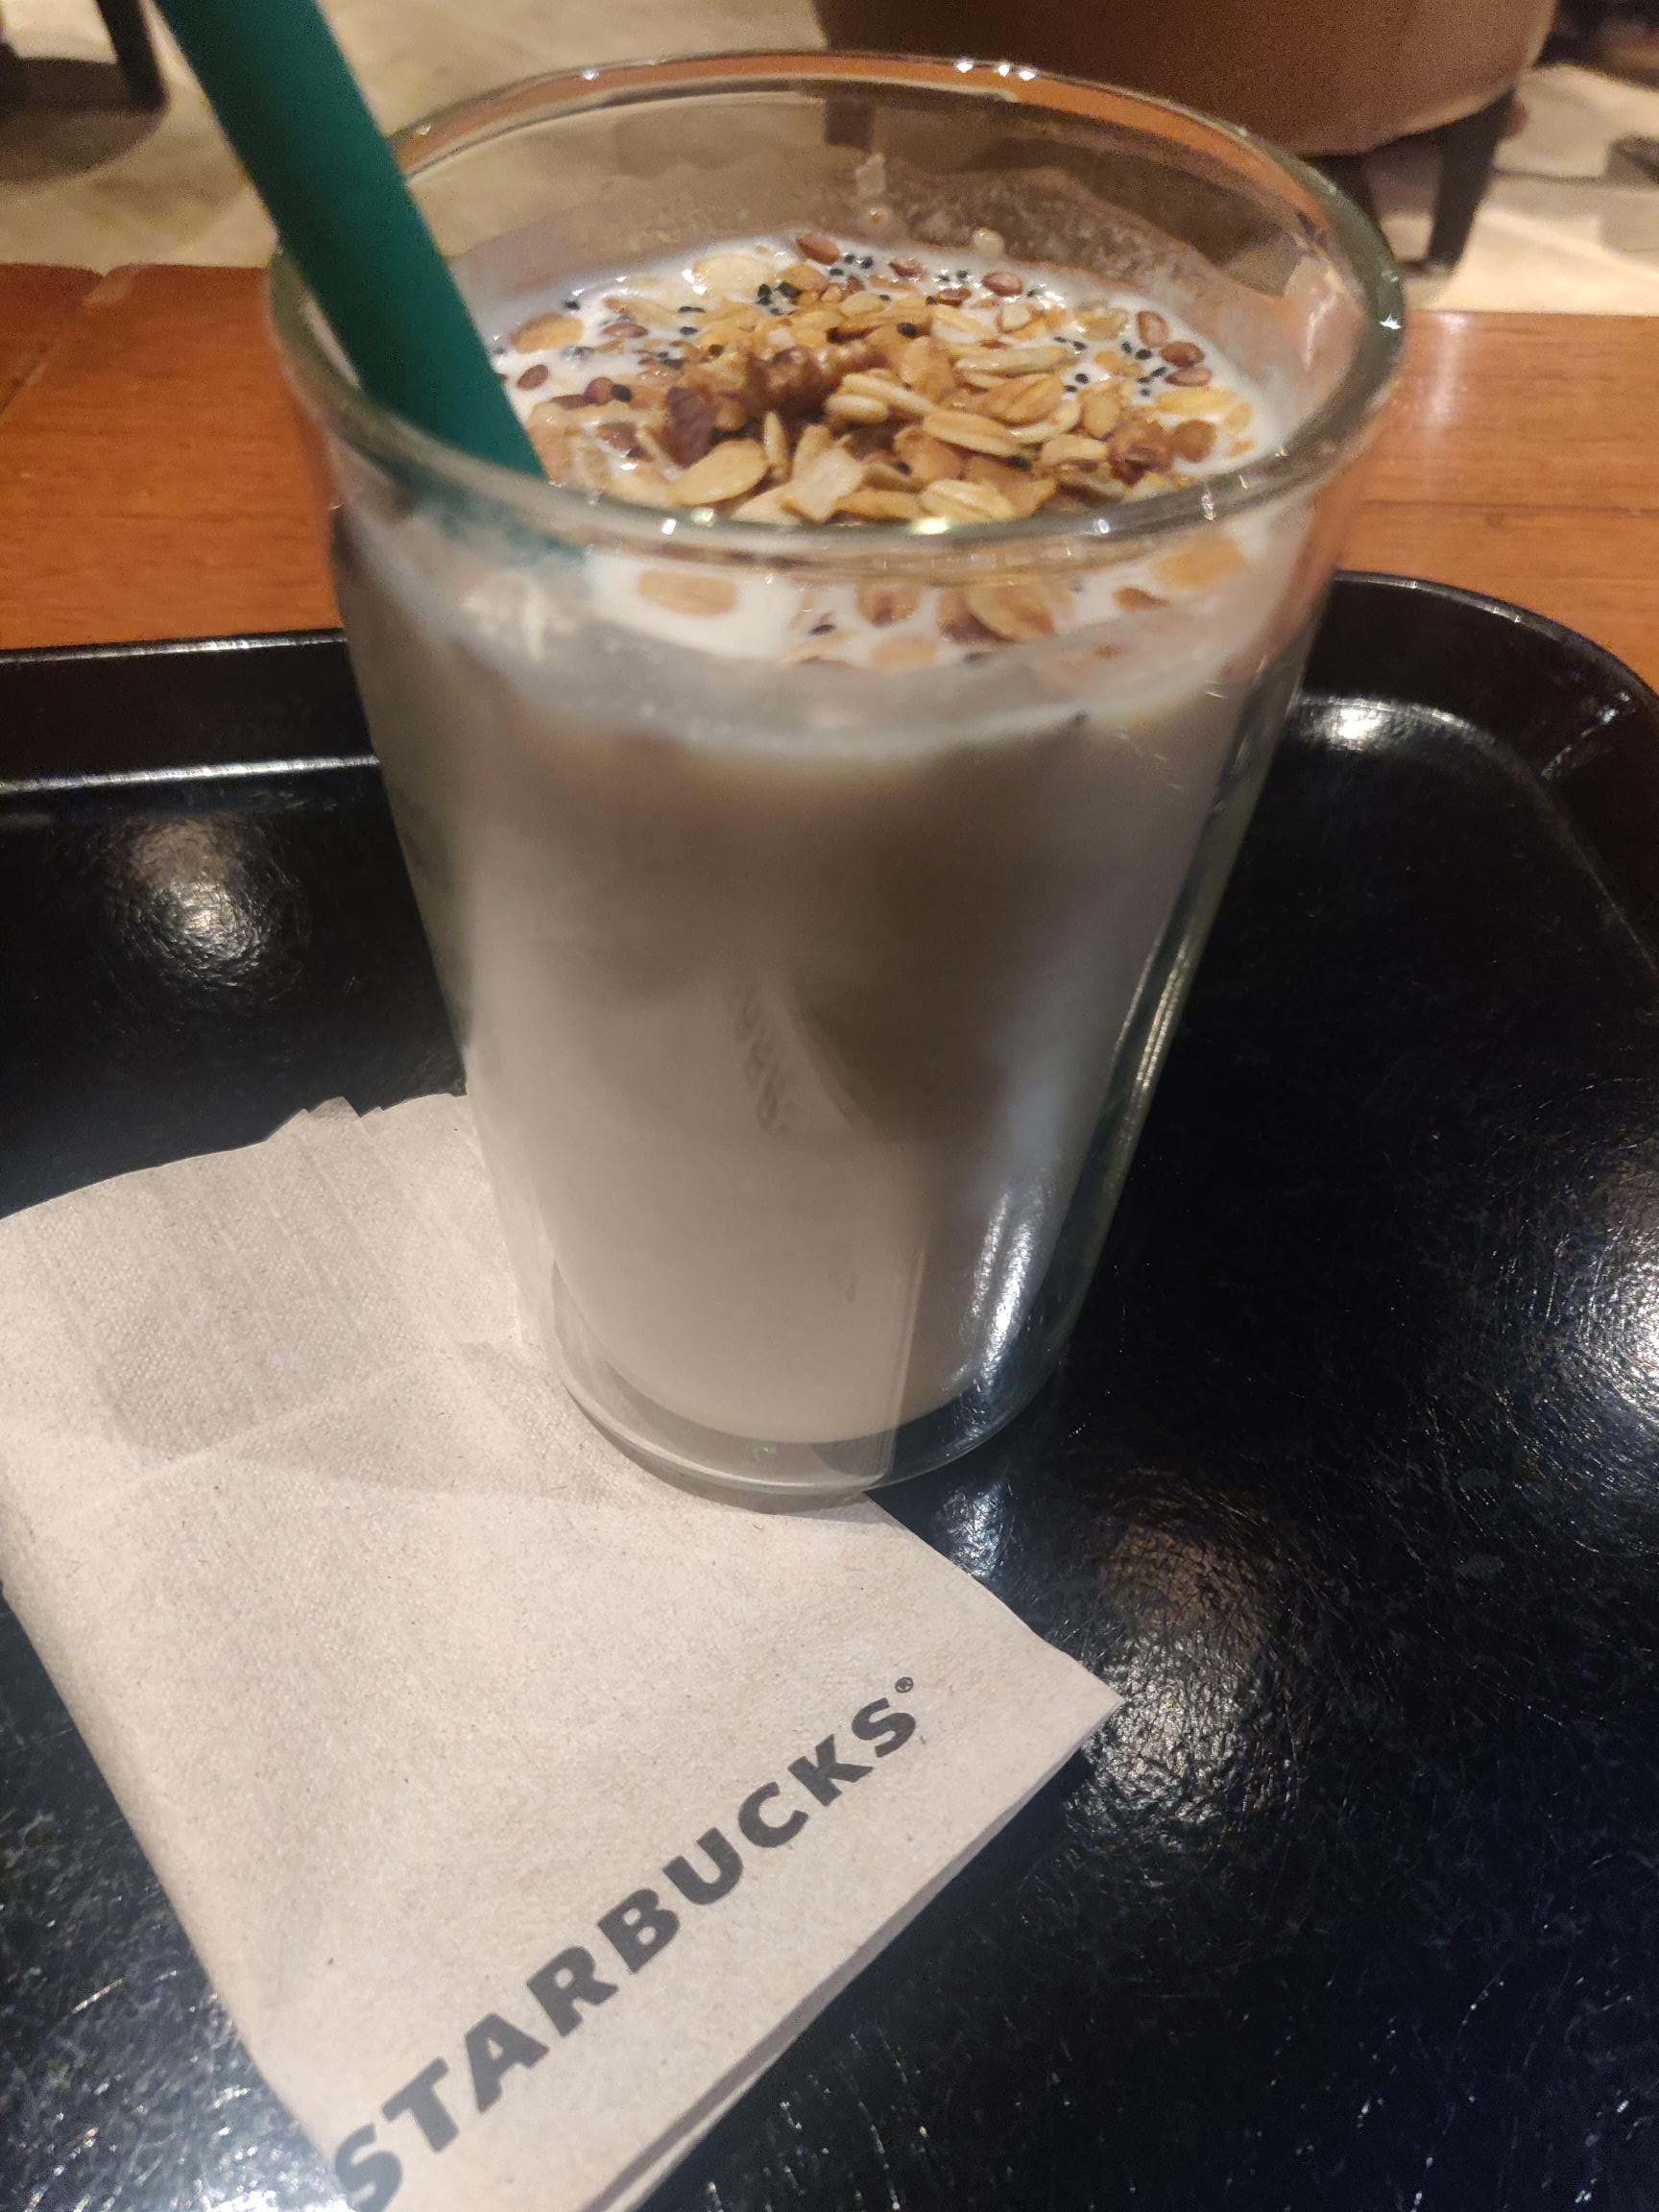 Starbucks Launches Scrumptious Range Of Smoothies To Its Menu